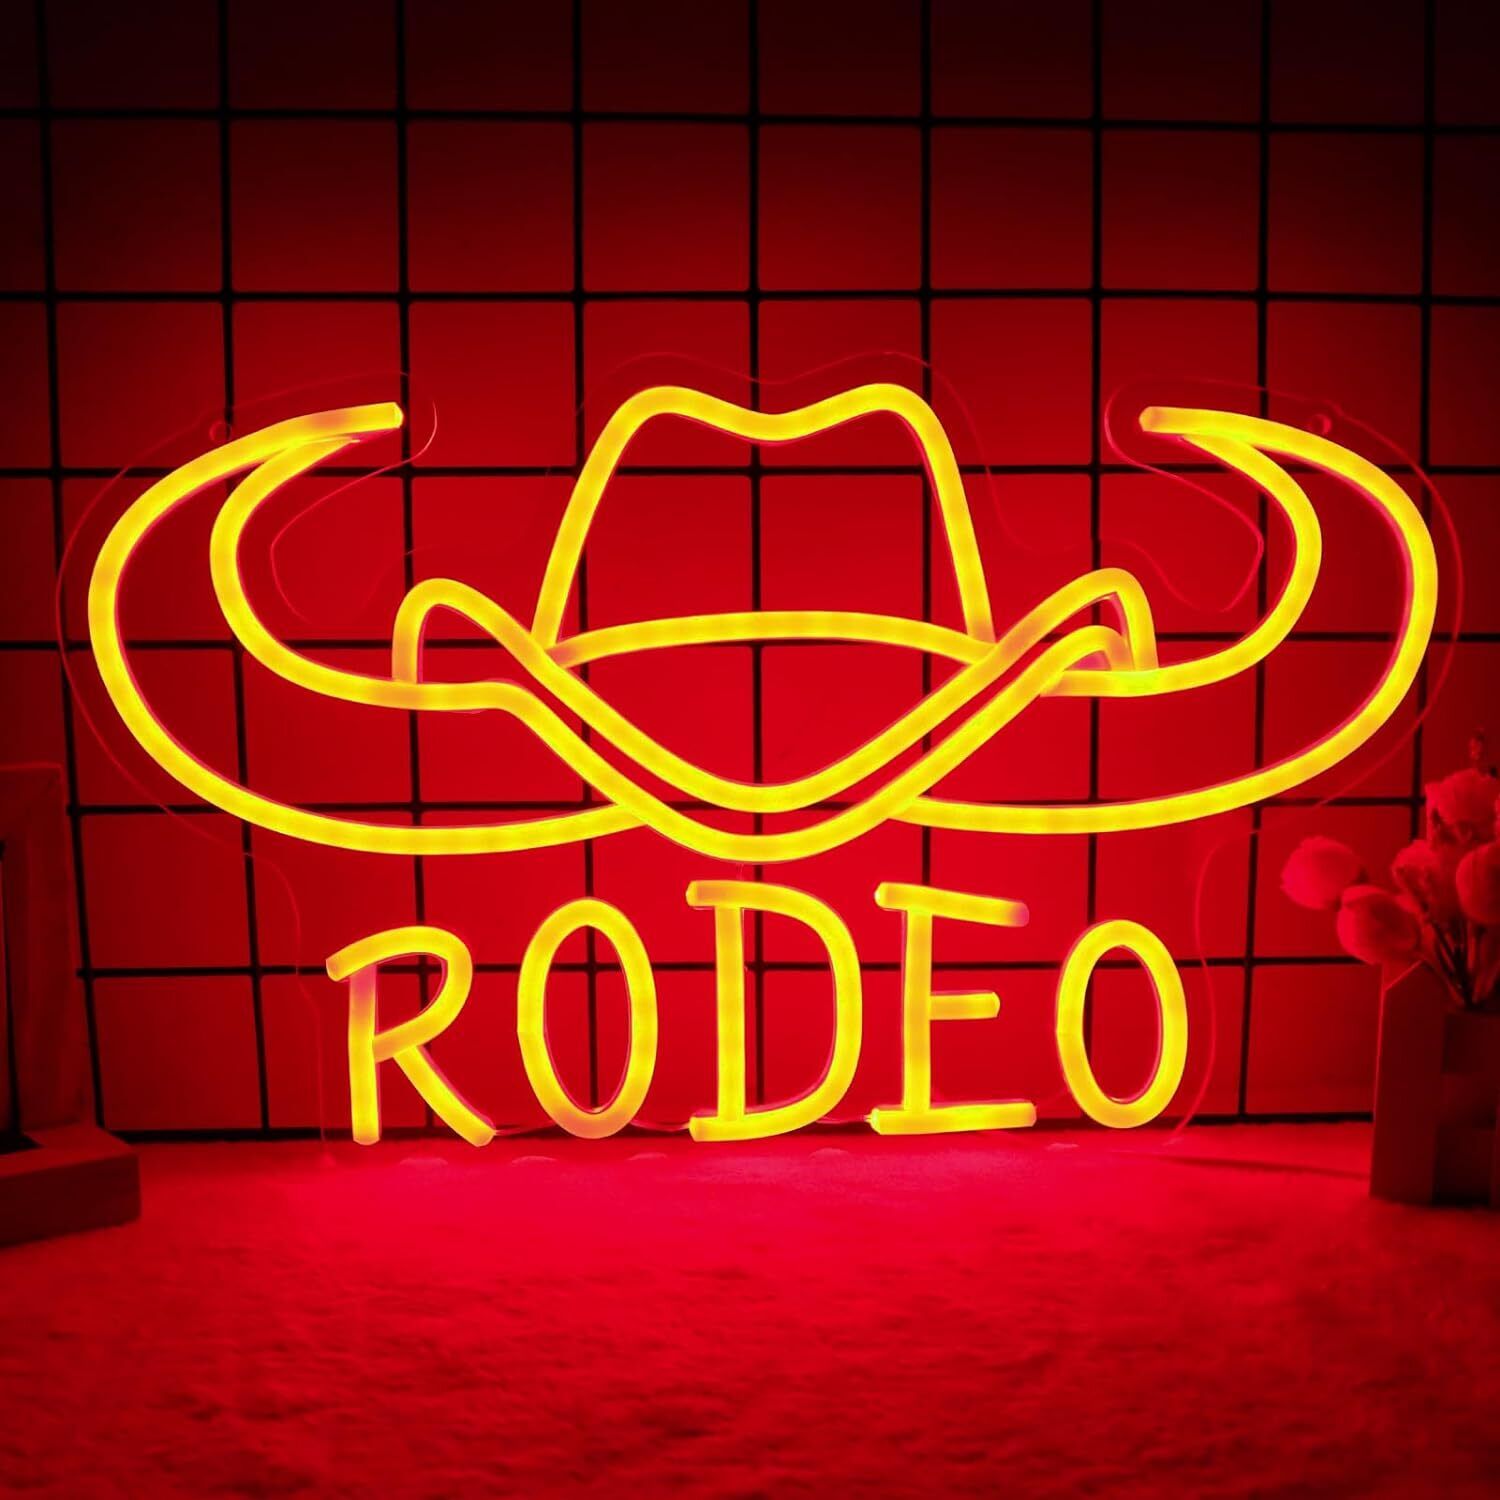 Cowboy Neon Signs Western Cowboy Neon Sign Longhorn Neon Signs LED Bull red